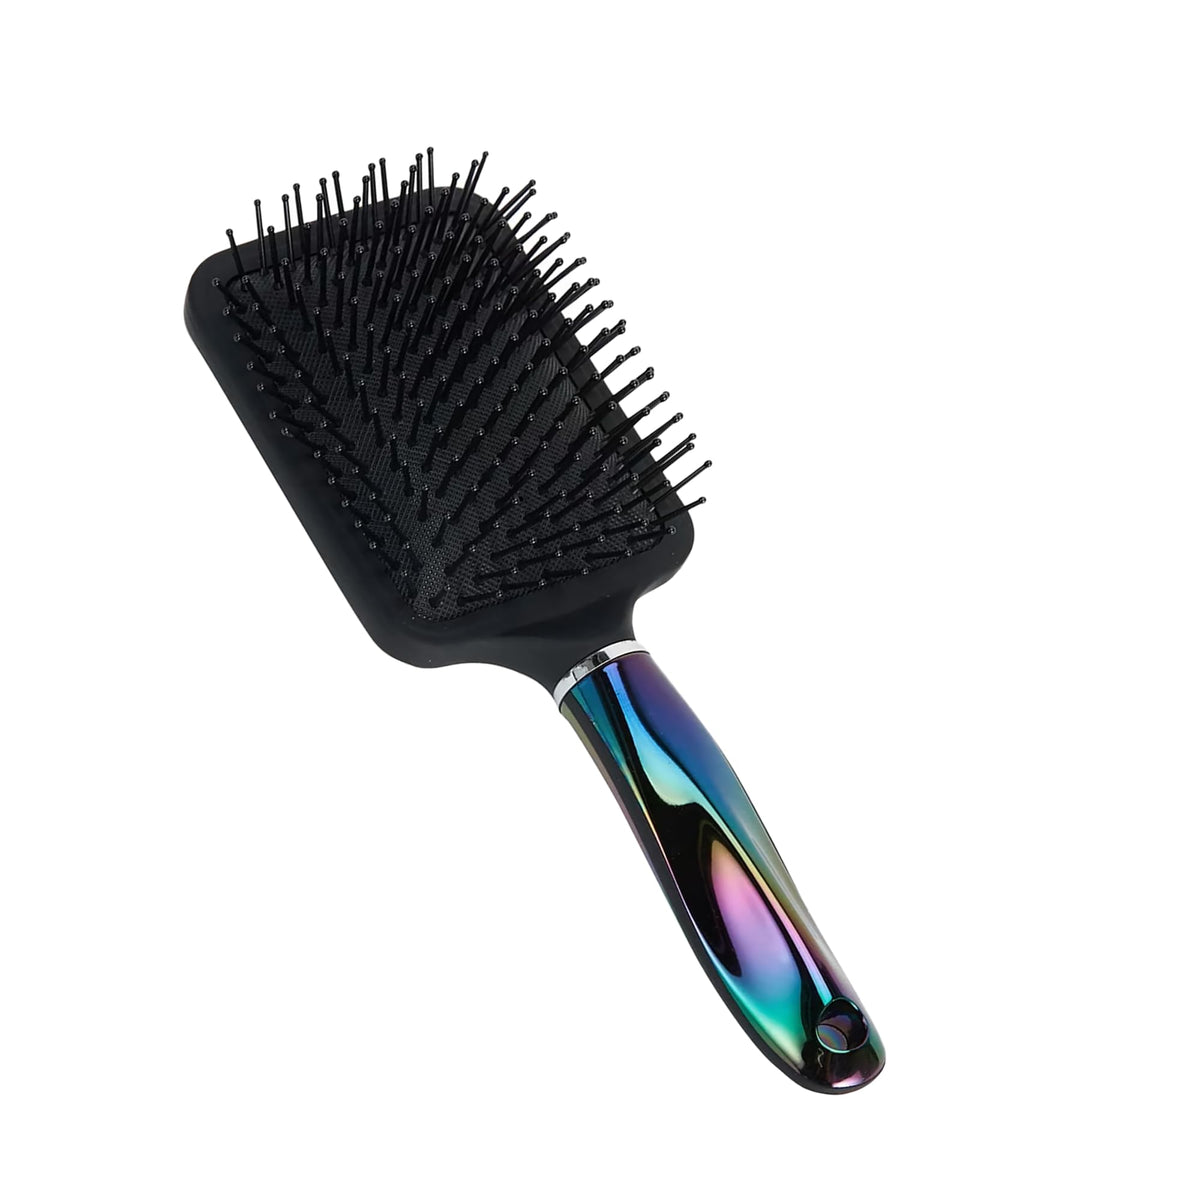 Anko Large Paddle Hair Brush| Wide Paddle Cushioned Hair Brush With Pin Hole For All Hair Types - For Women, Men, Thick, Curly, Wavy, Long, Short, Wet And Dry Hair